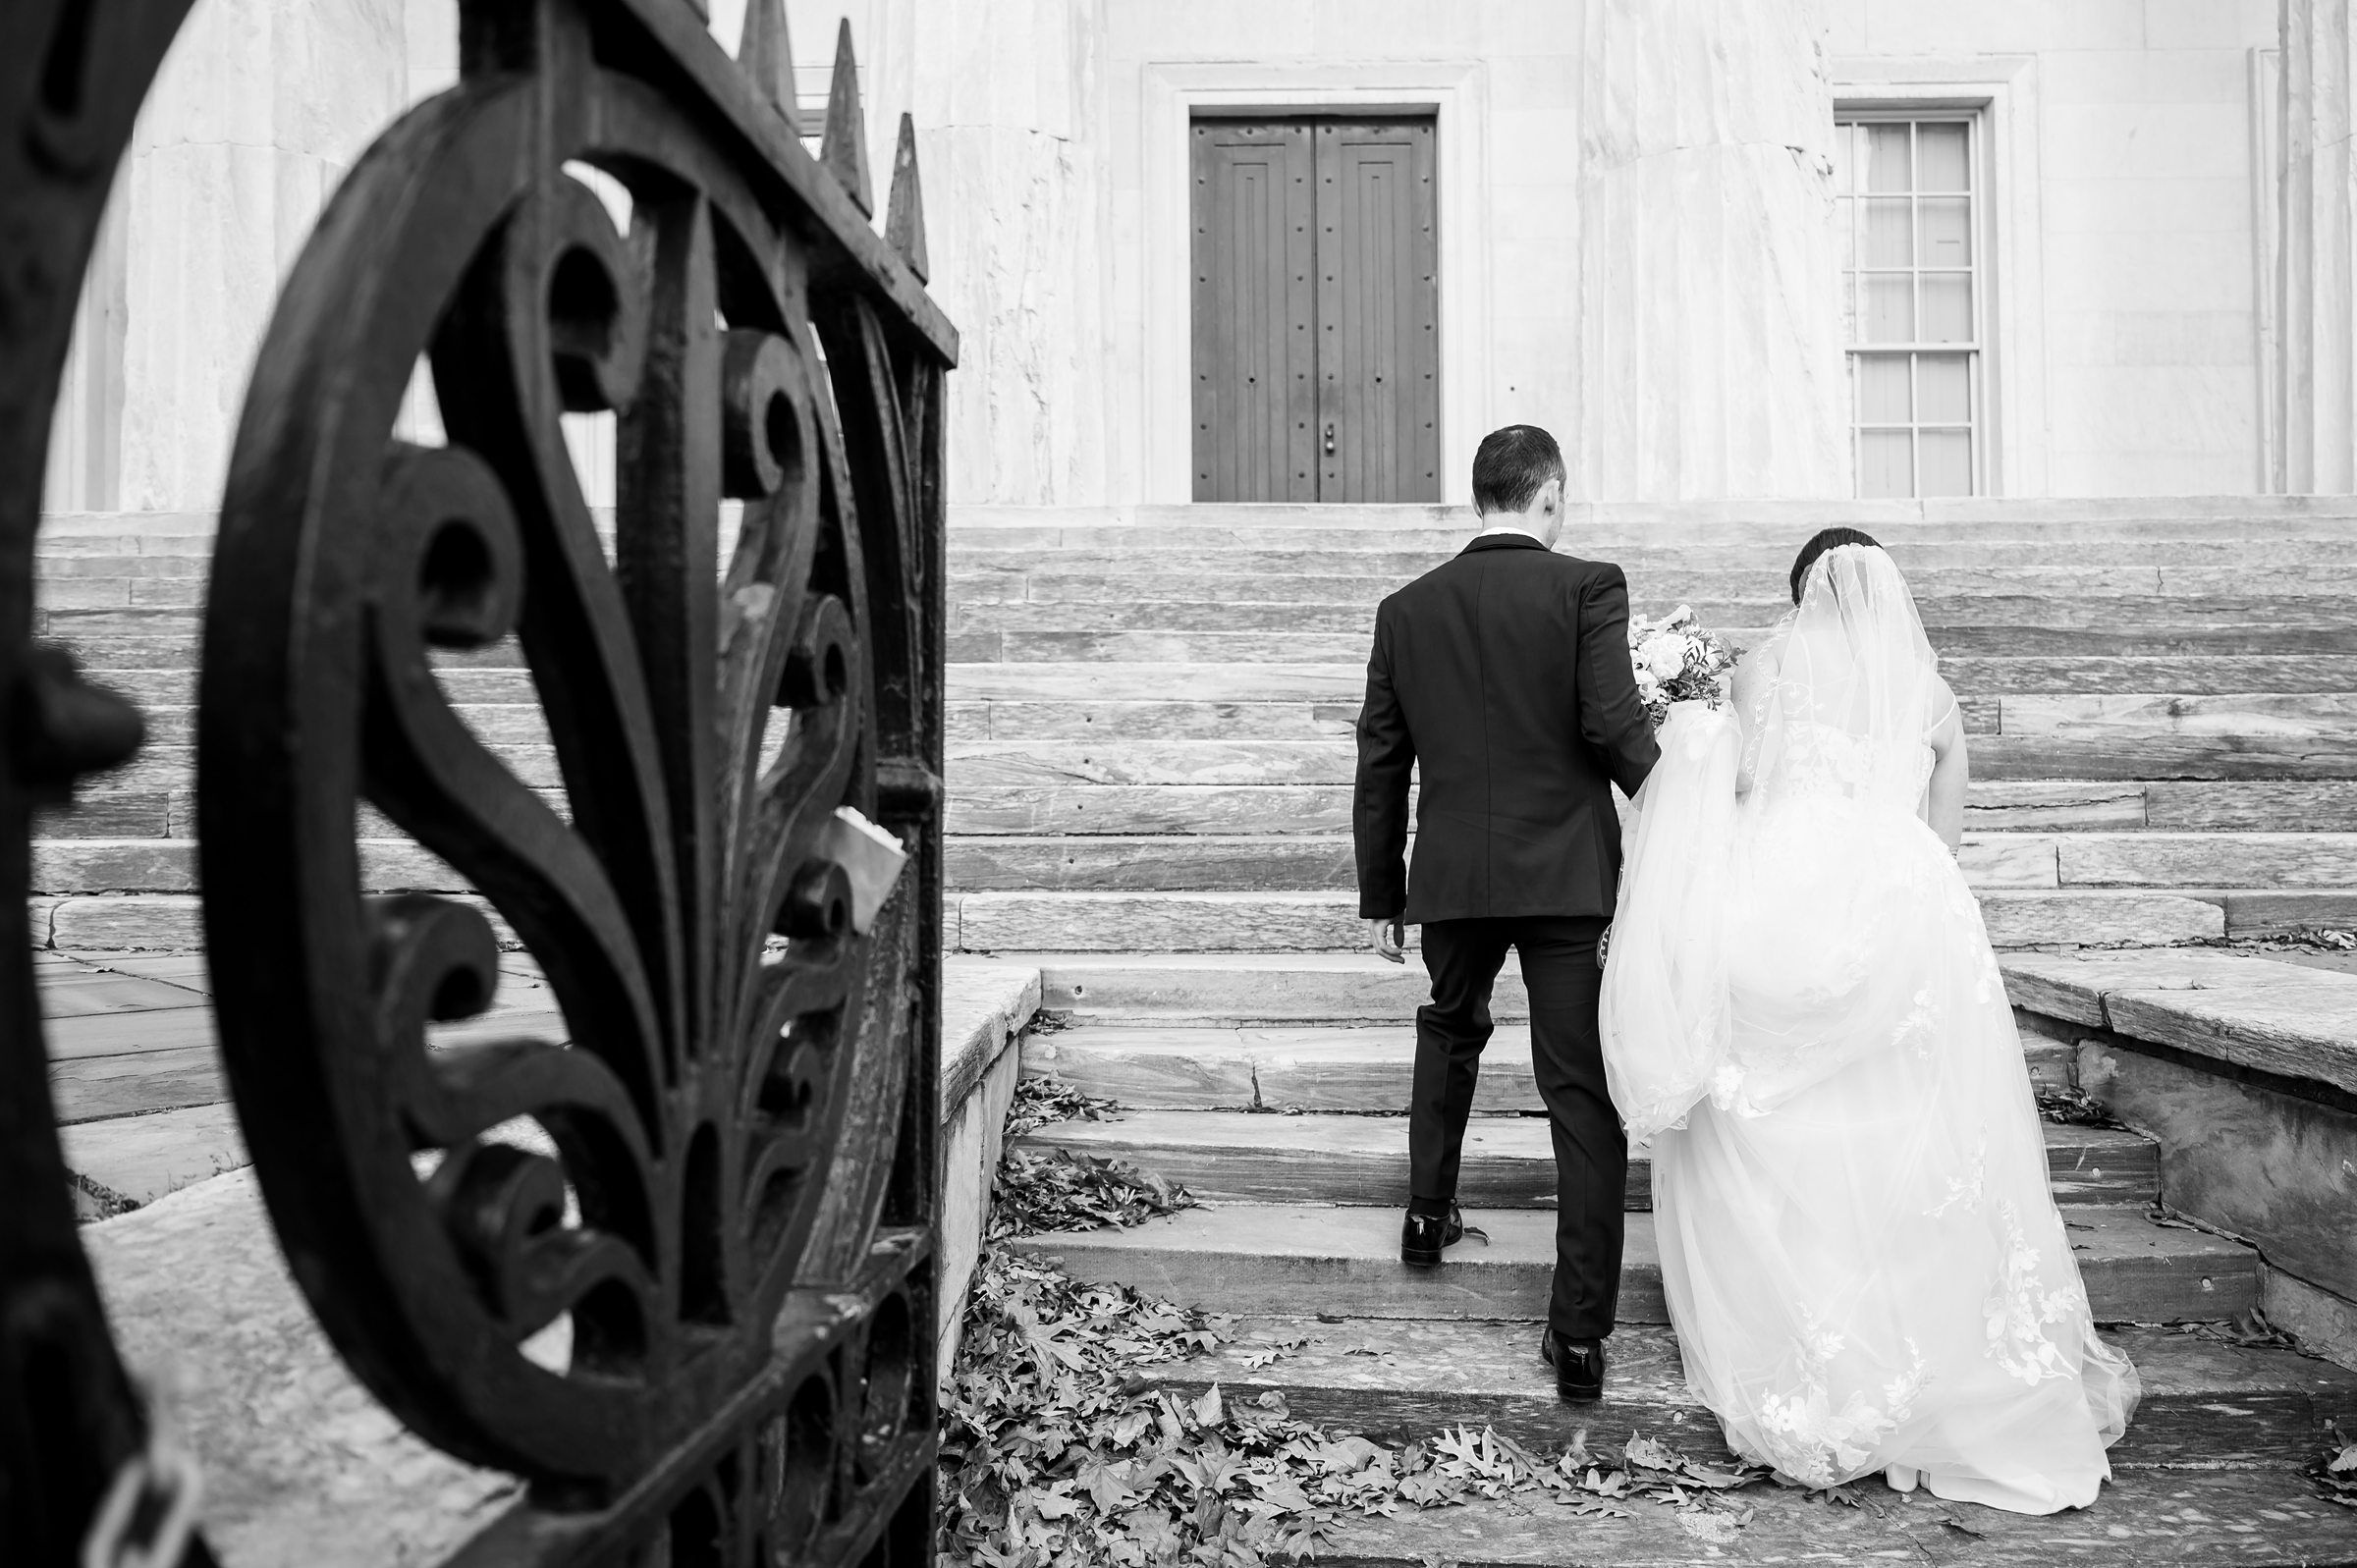 At a Lilah Events wedding, the bride and groom gracefully descend the steps of a building.